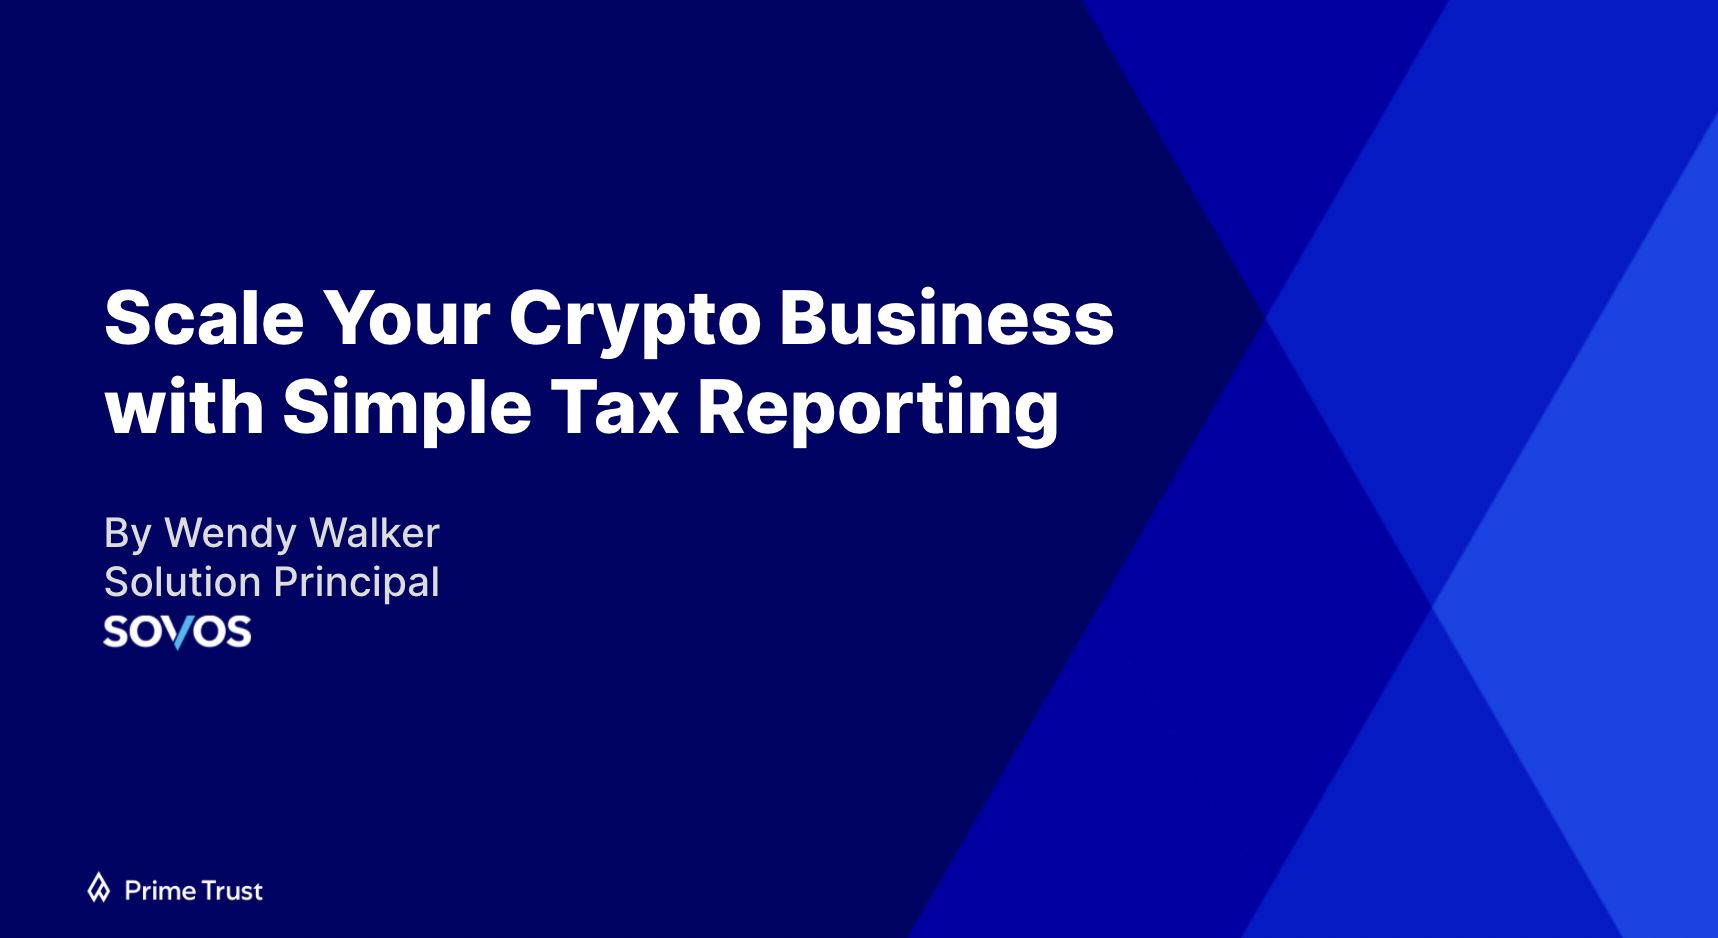 Scale Your Crypto Business with Simple Tax Reporting